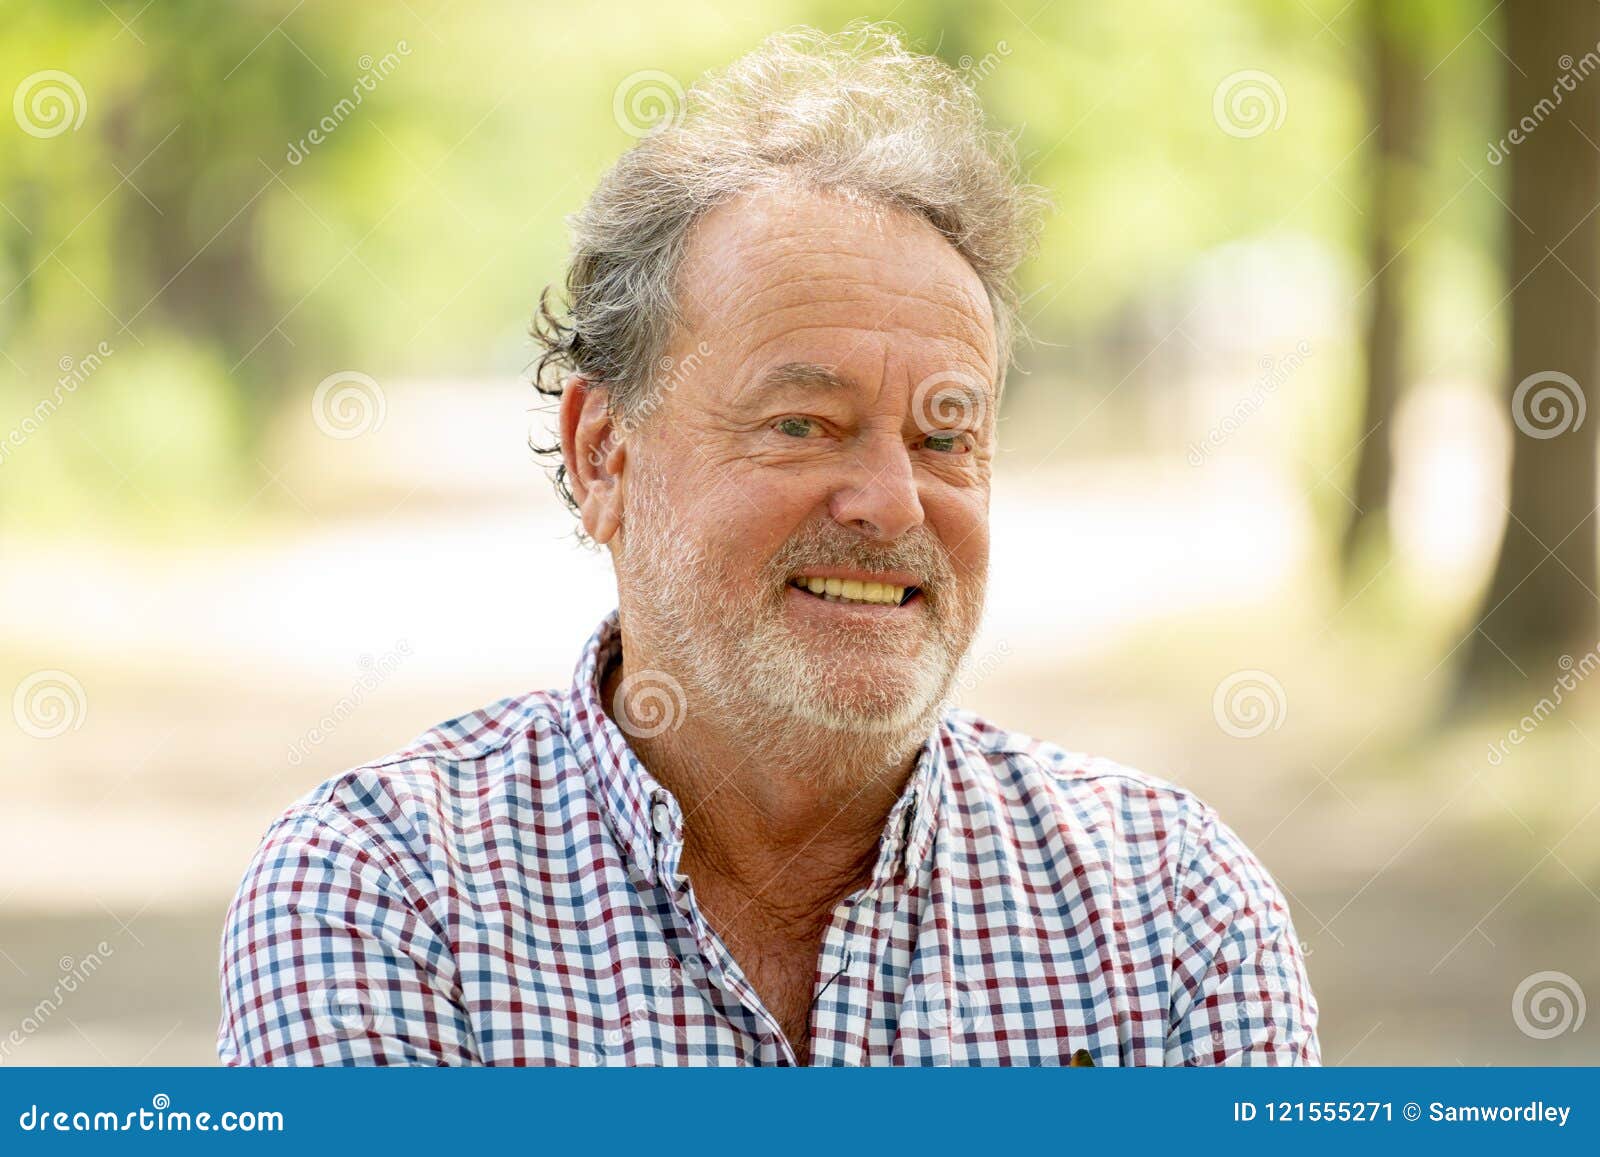 Funny Looking Old Man Having a Good Time Stock Image - Image of expressive,  funny: 121555271